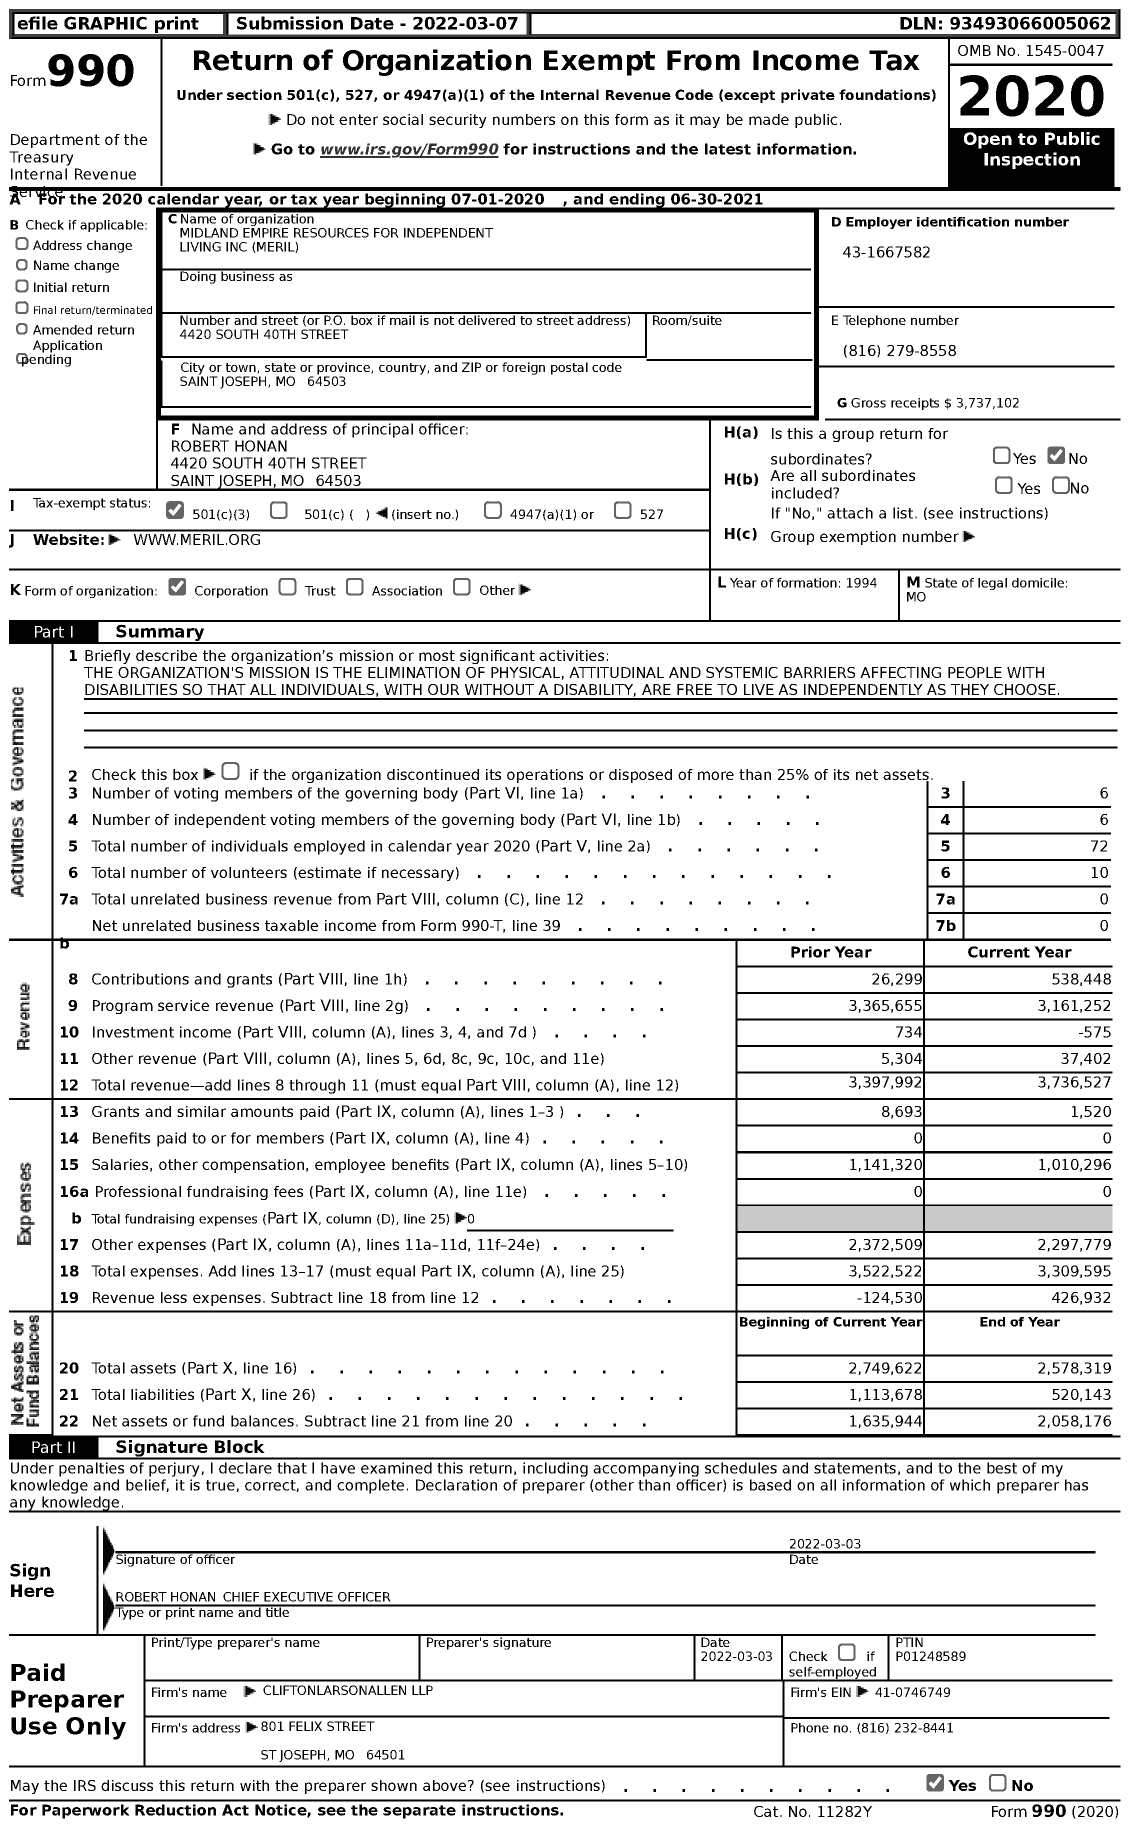 Image of first page of 2020 Form 990 for Midland Empire Resources for Independent Living (MERIL)